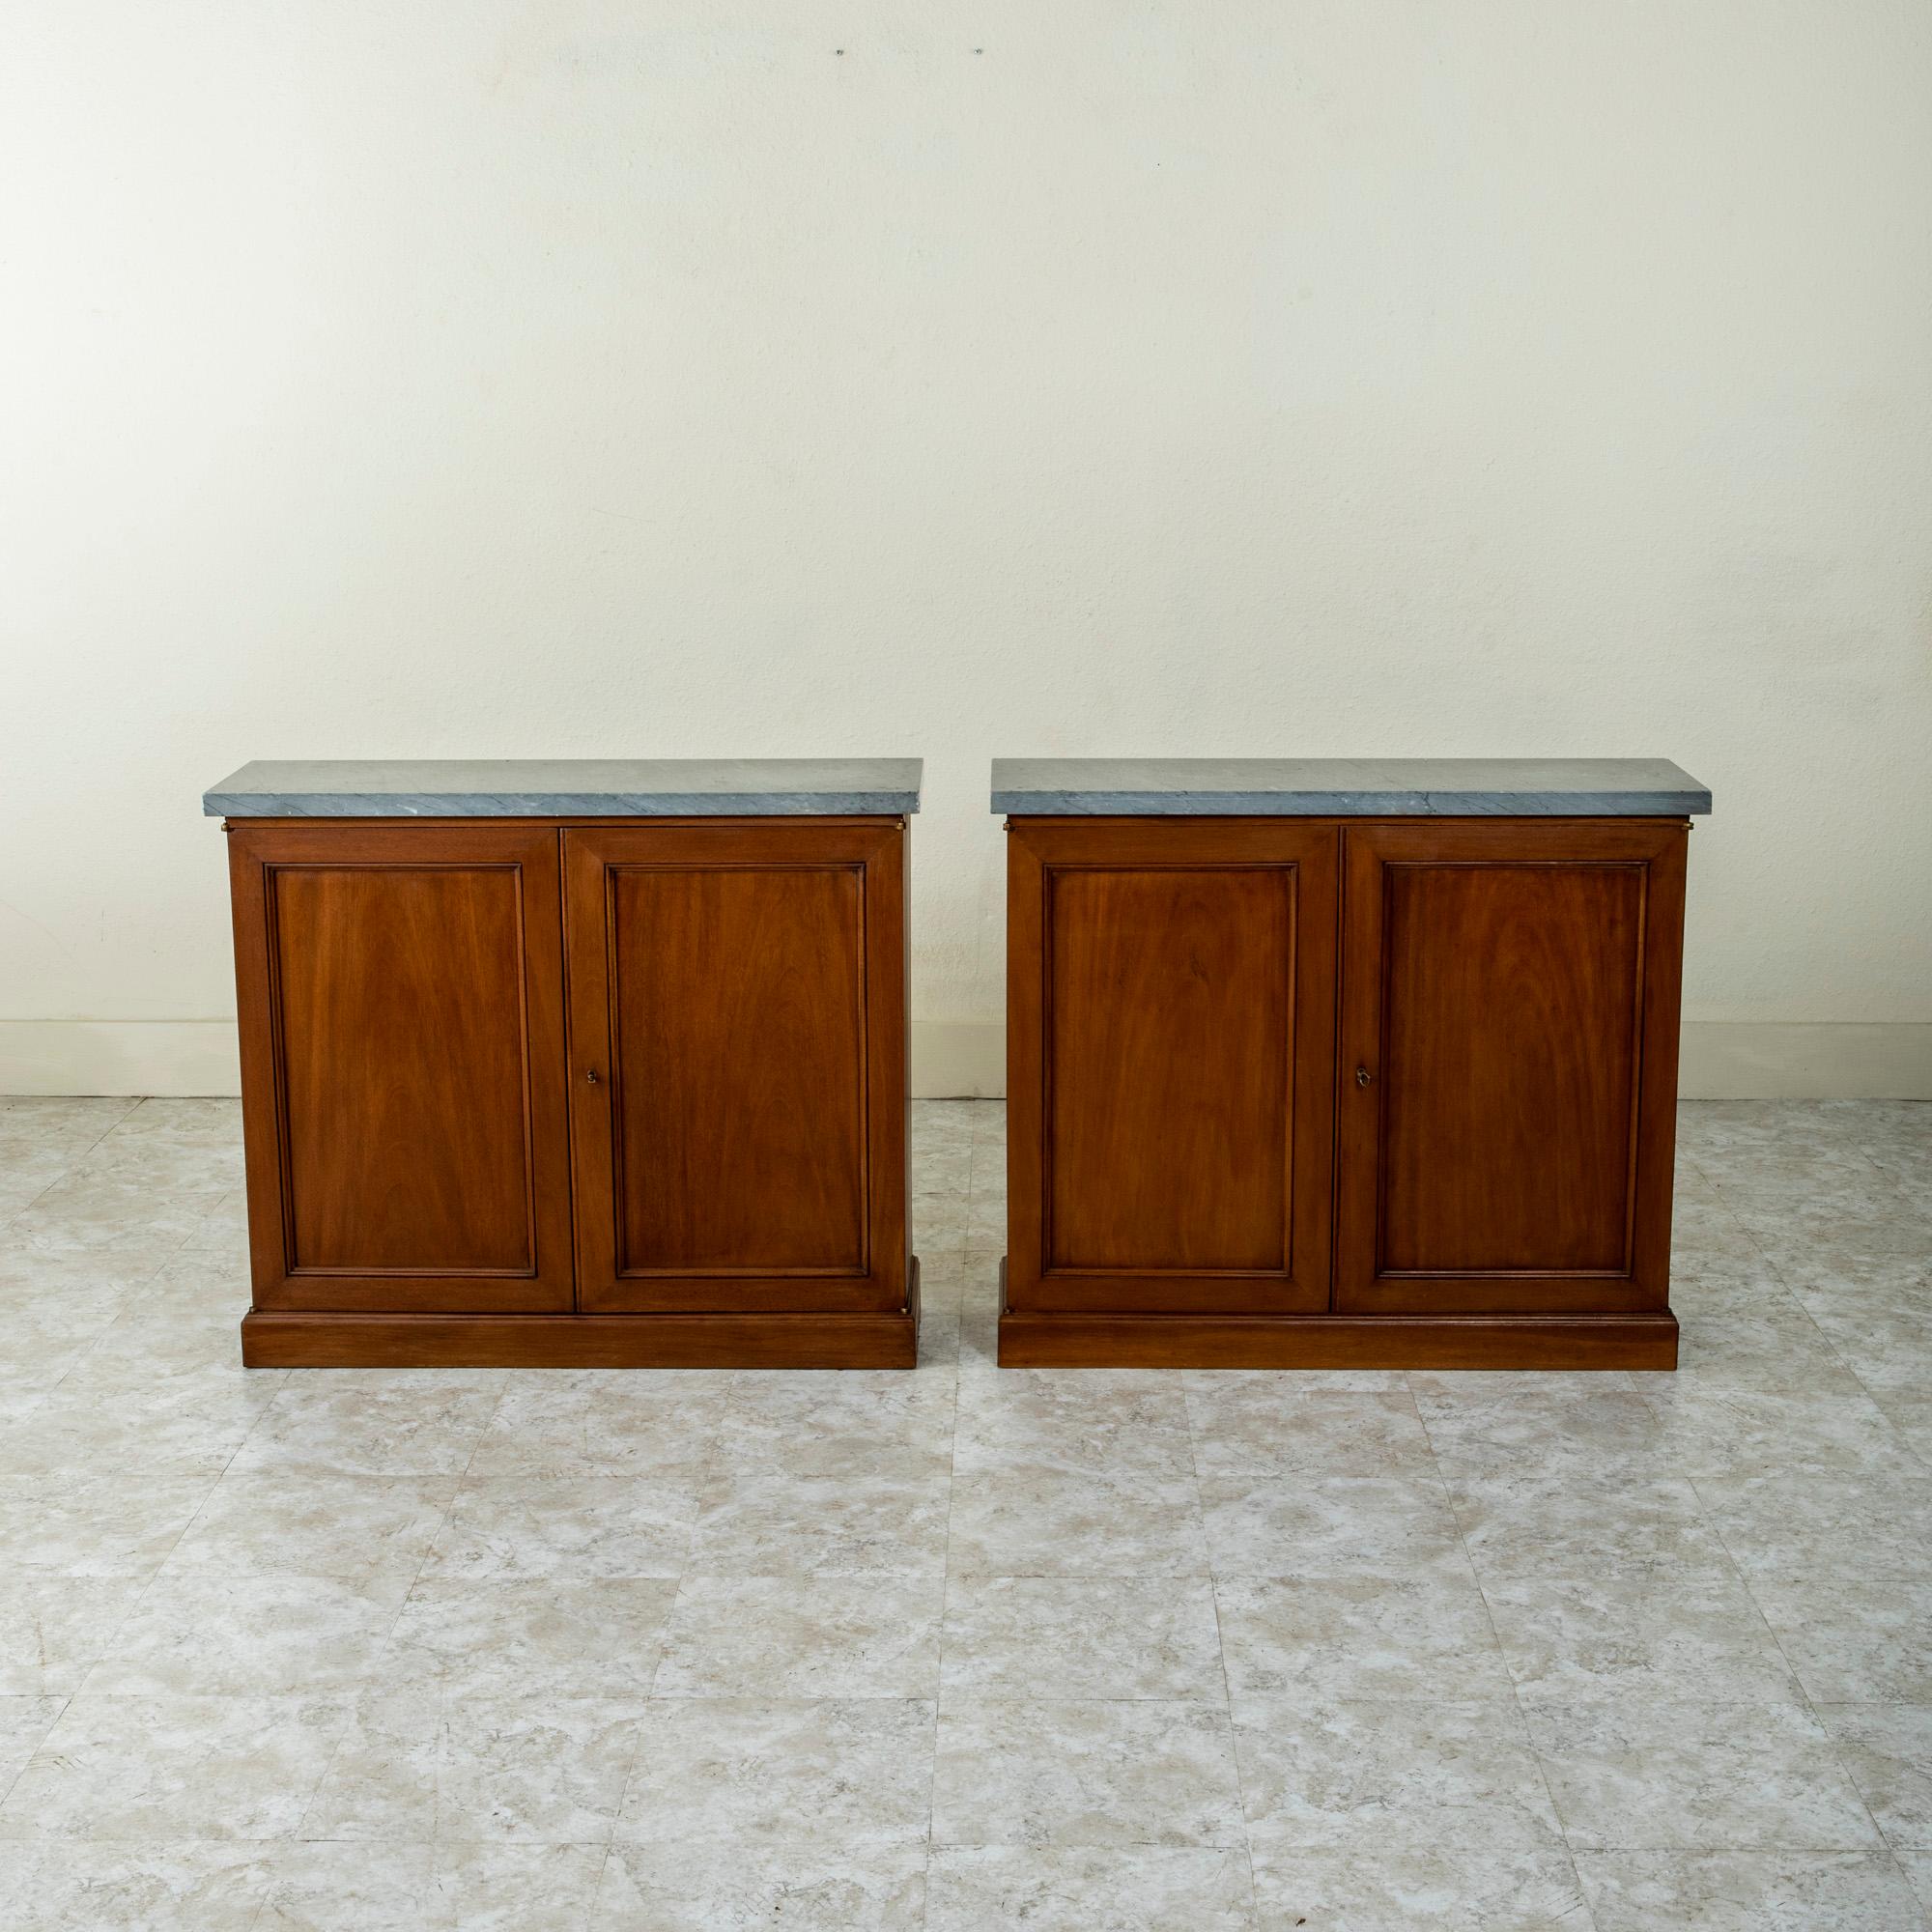 A handsome pair from the Mid-20th Century, these console cabinets are constructed of solid mahogany and feature grey marble tops with black veining. The cabinet doors open to reveal two interior adjustable shelves. Each cabinet has its own key with